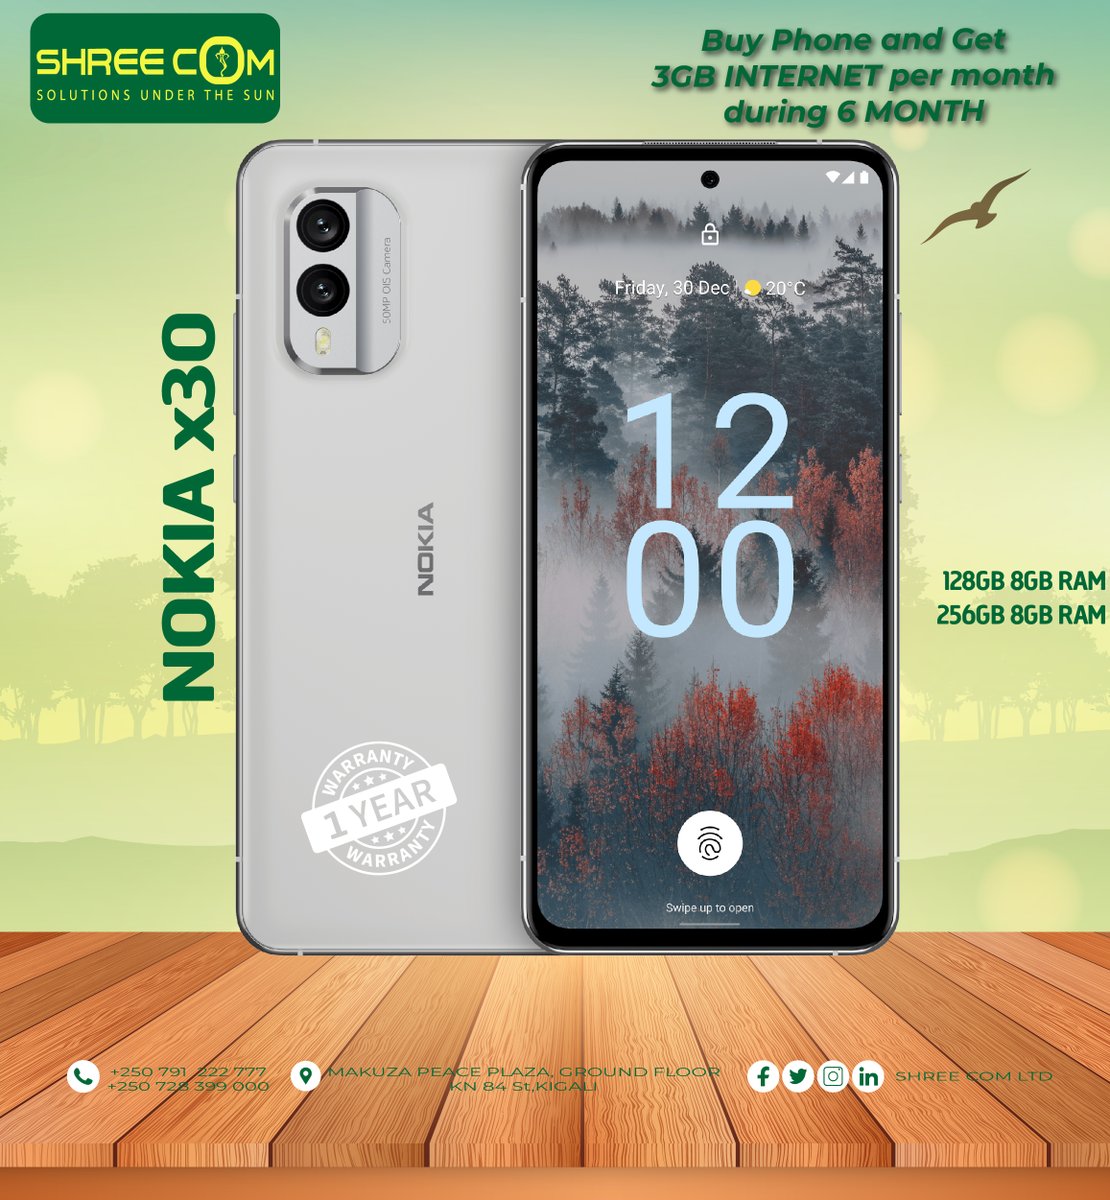 The new Nokia X30, with High performance, Buy it and get free Mango 4G internet monthly for 6 Months & All beautiful Smart and Originals Phones are just from Shreecom Ltd, Don't delay we are in Promotion